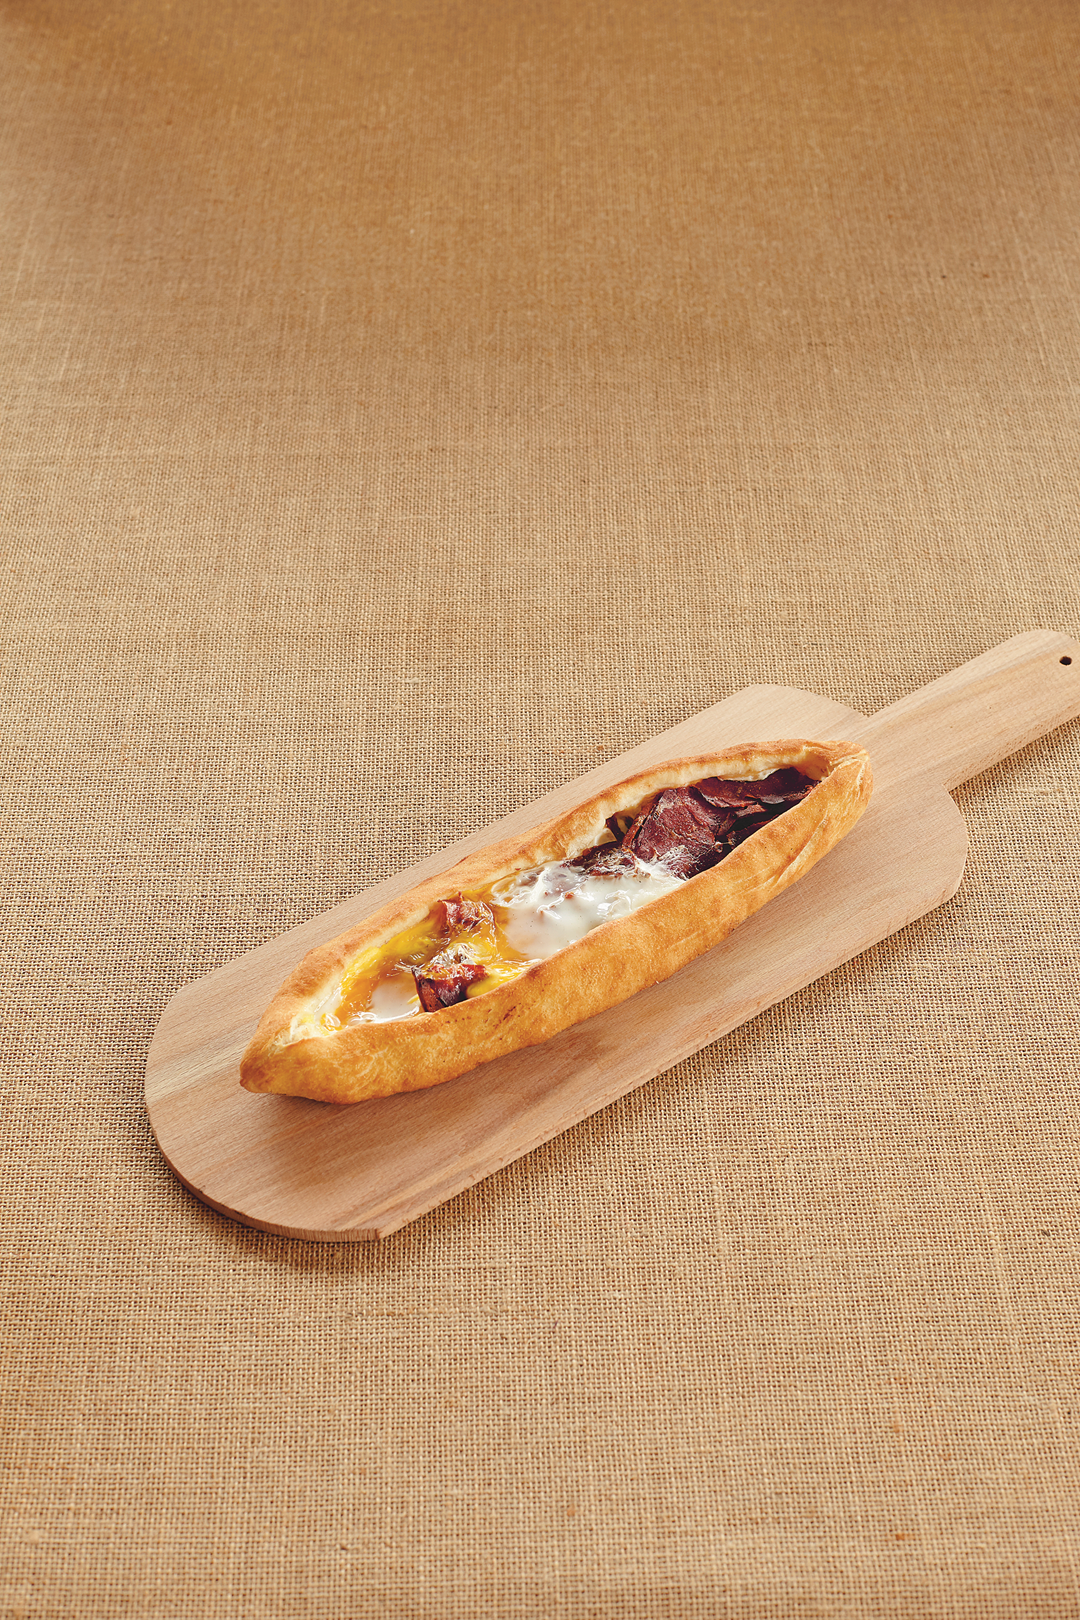 Beef pide, from The Turkish Cookbook